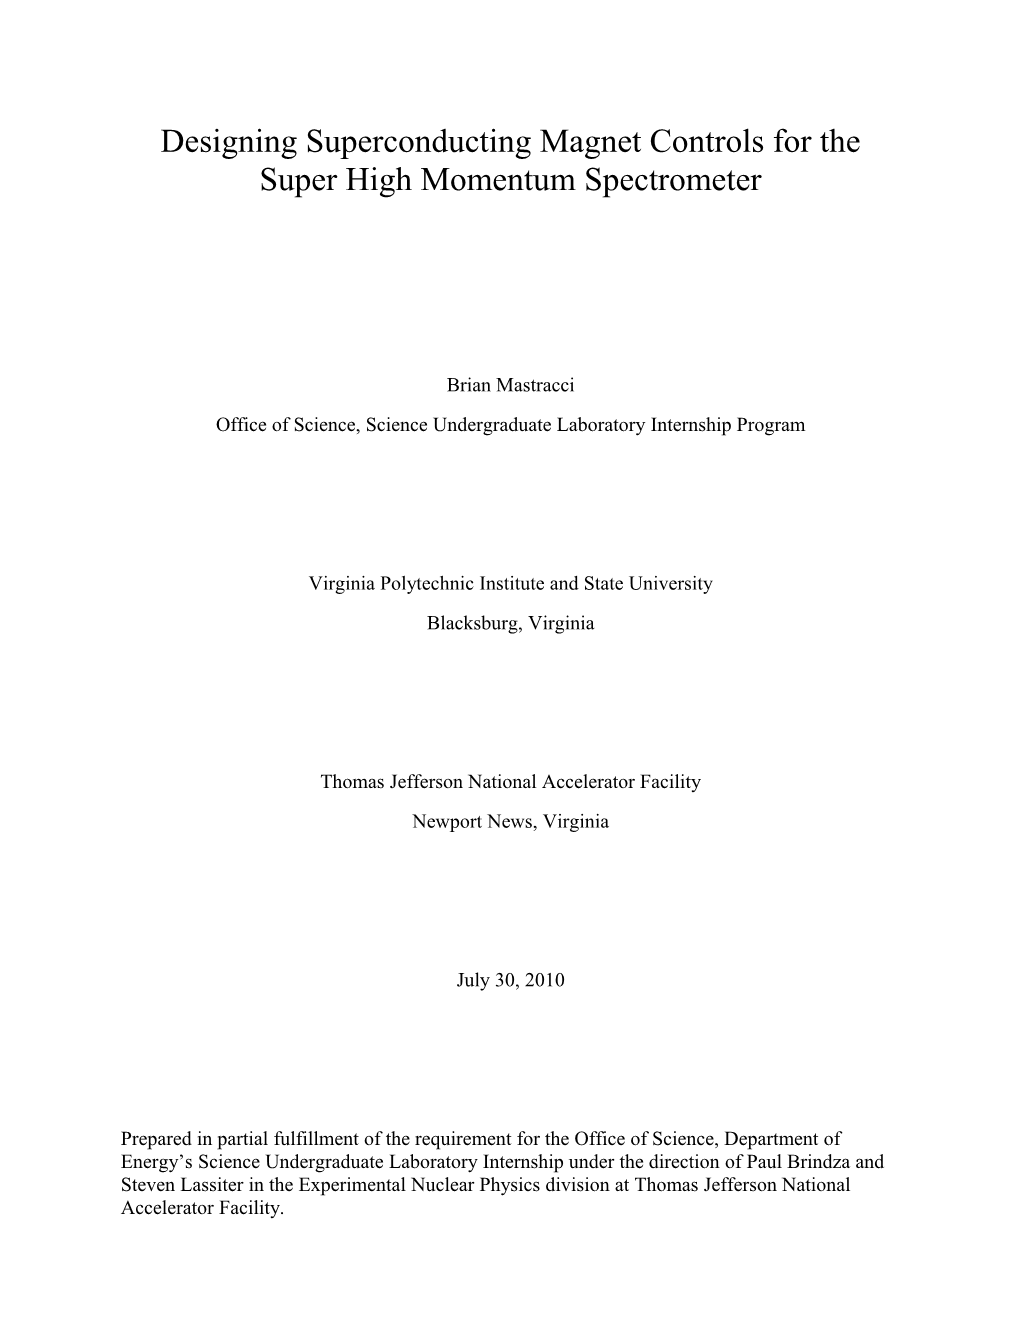 Designing Superconducting Magnet Controls for the Super High Momentum Spectrometer